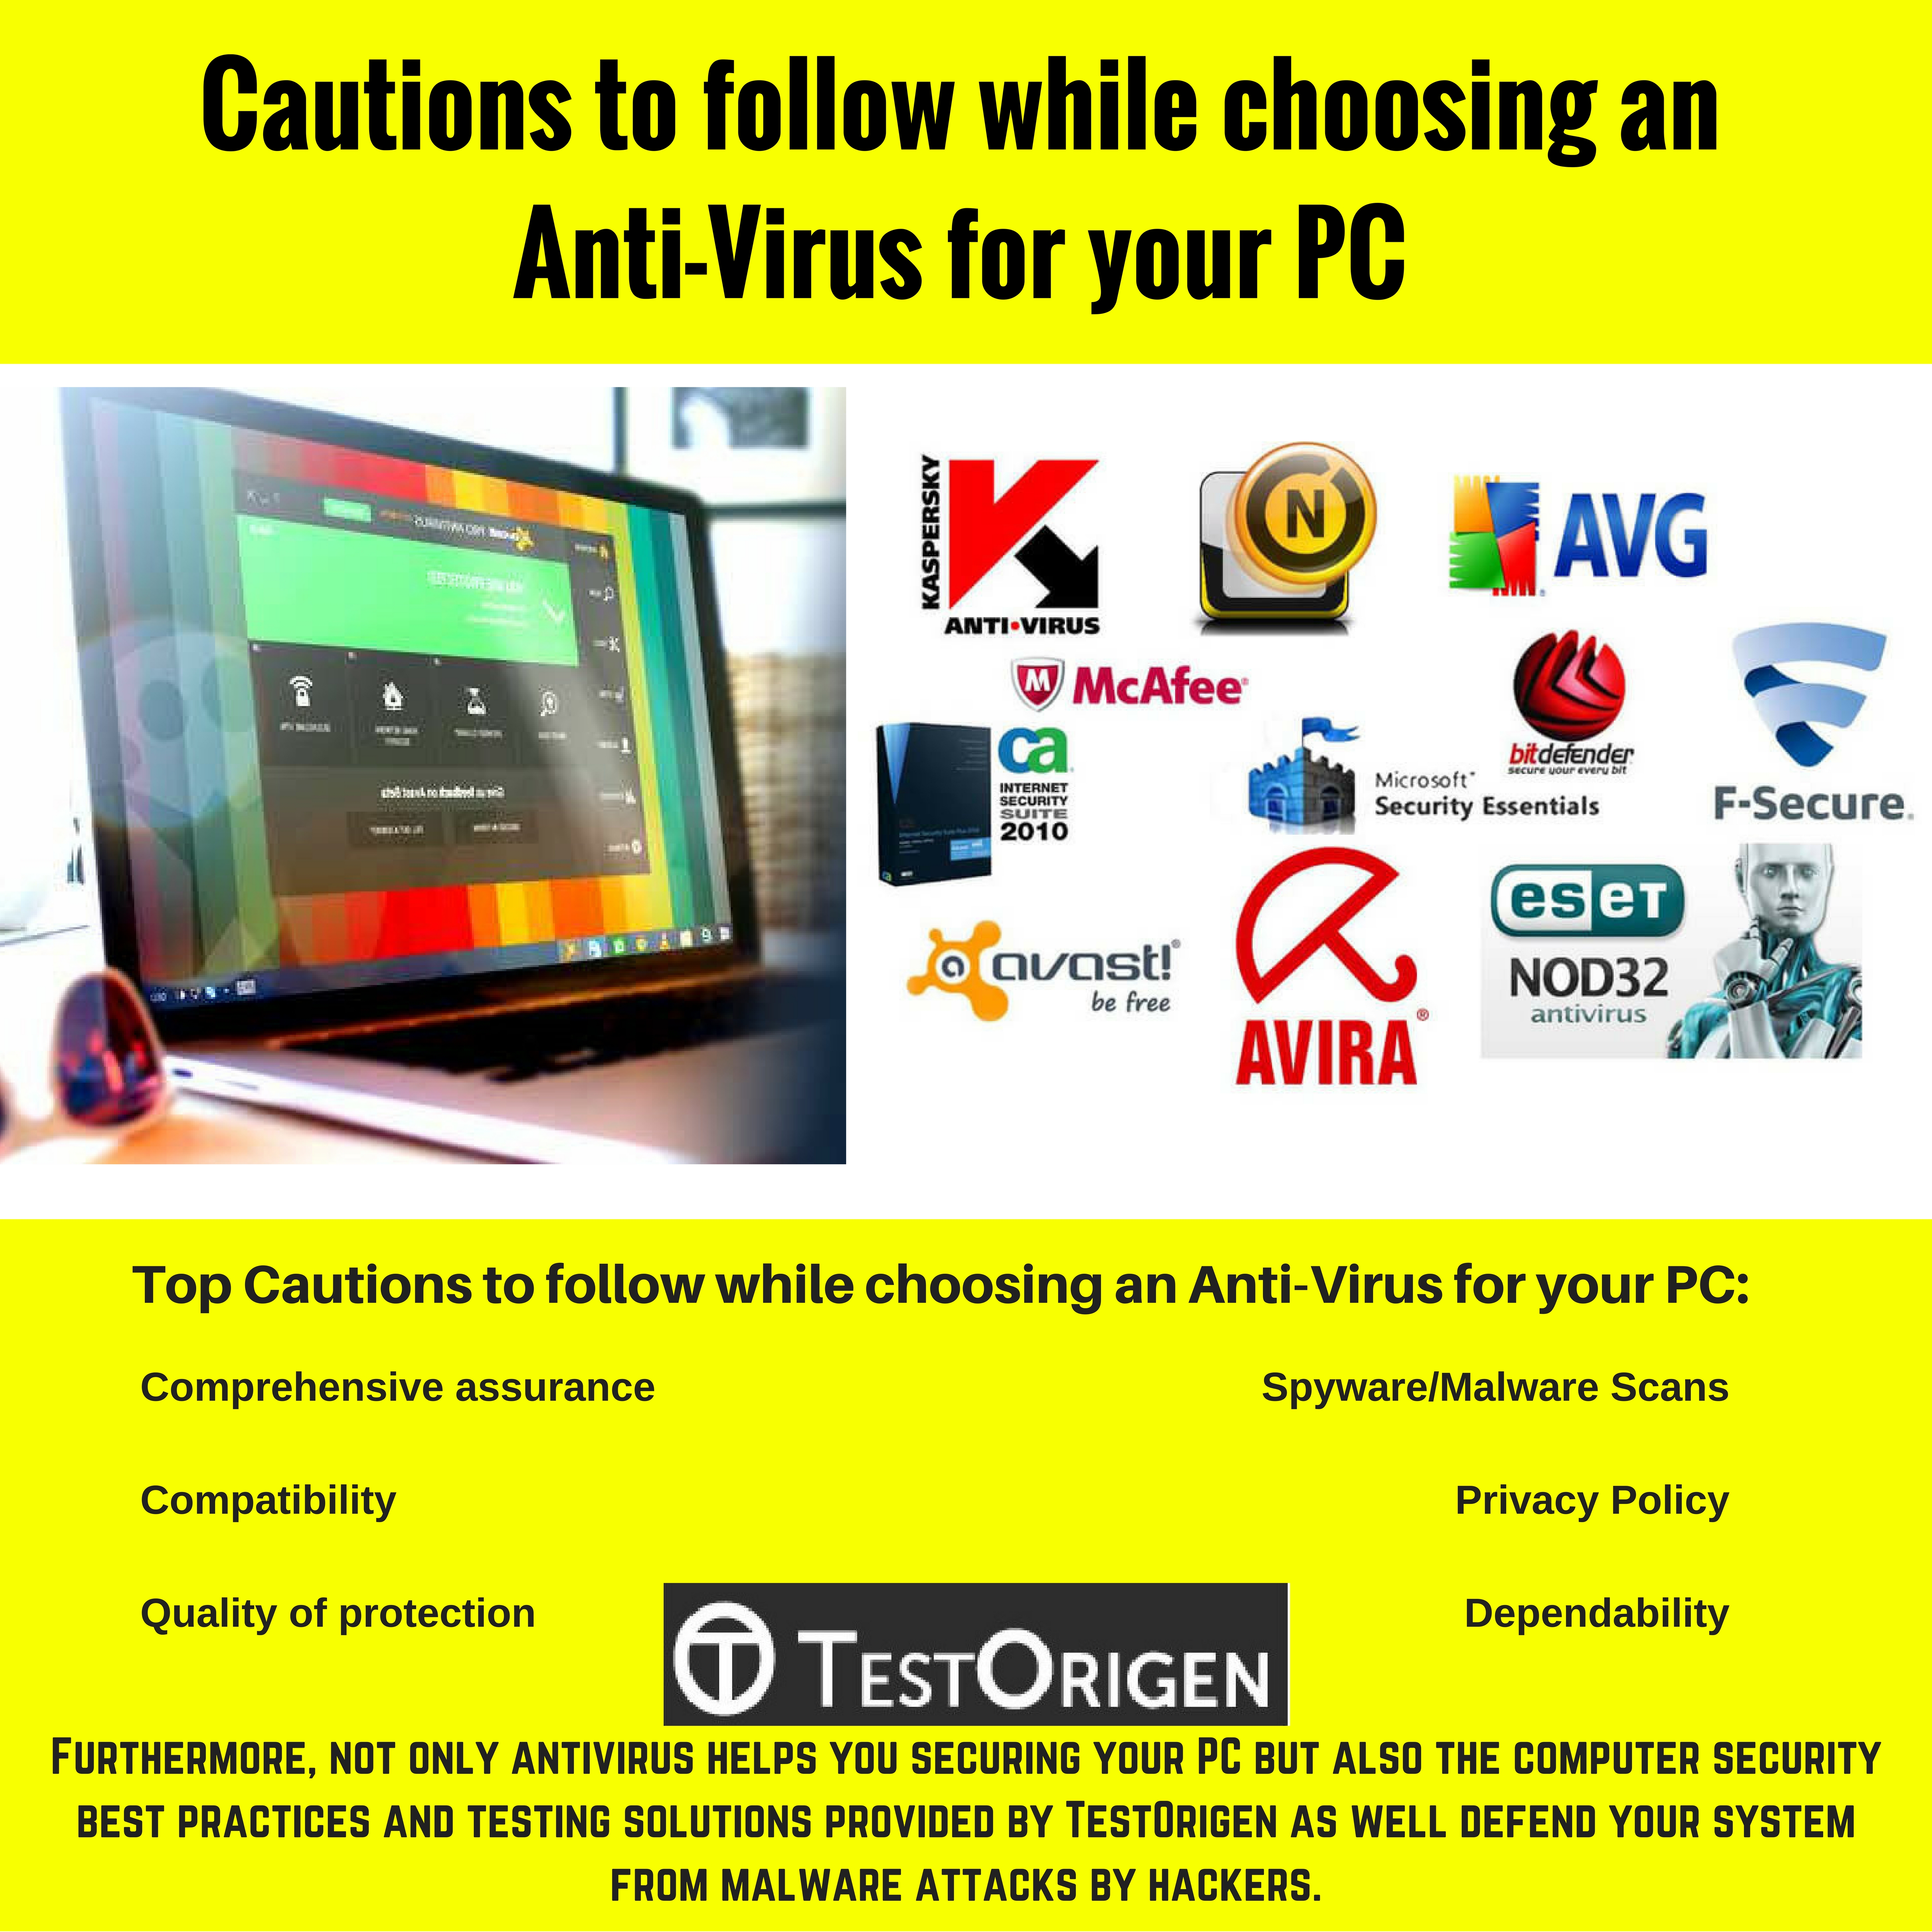 Cautions to follow while choosing an Anti-Virus for your PC